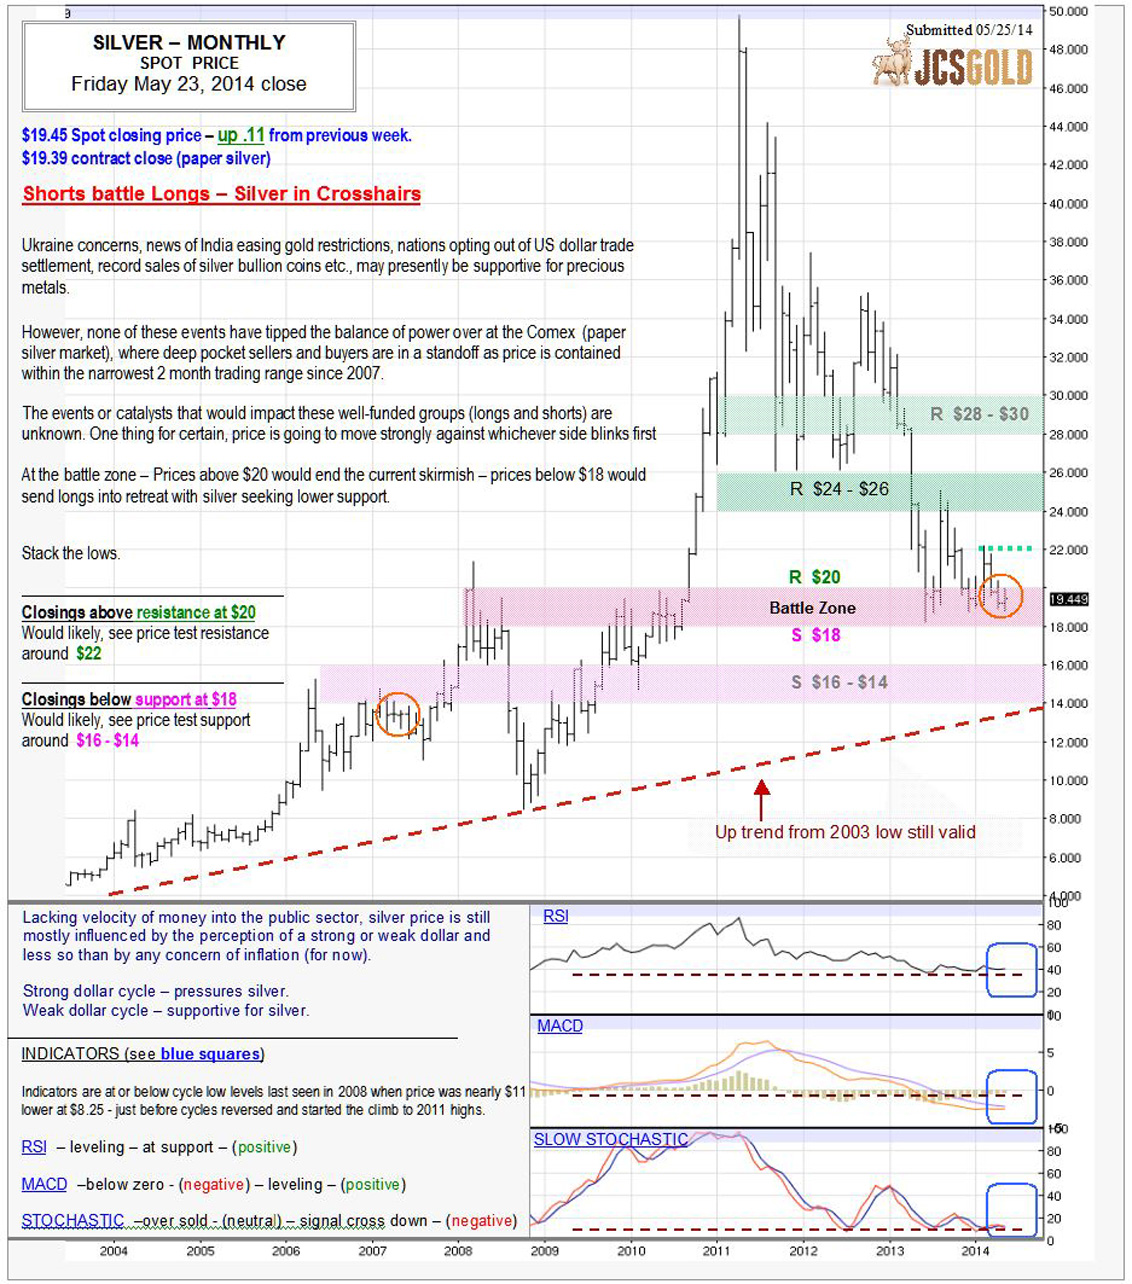 May 23, 2014 chart & commentary